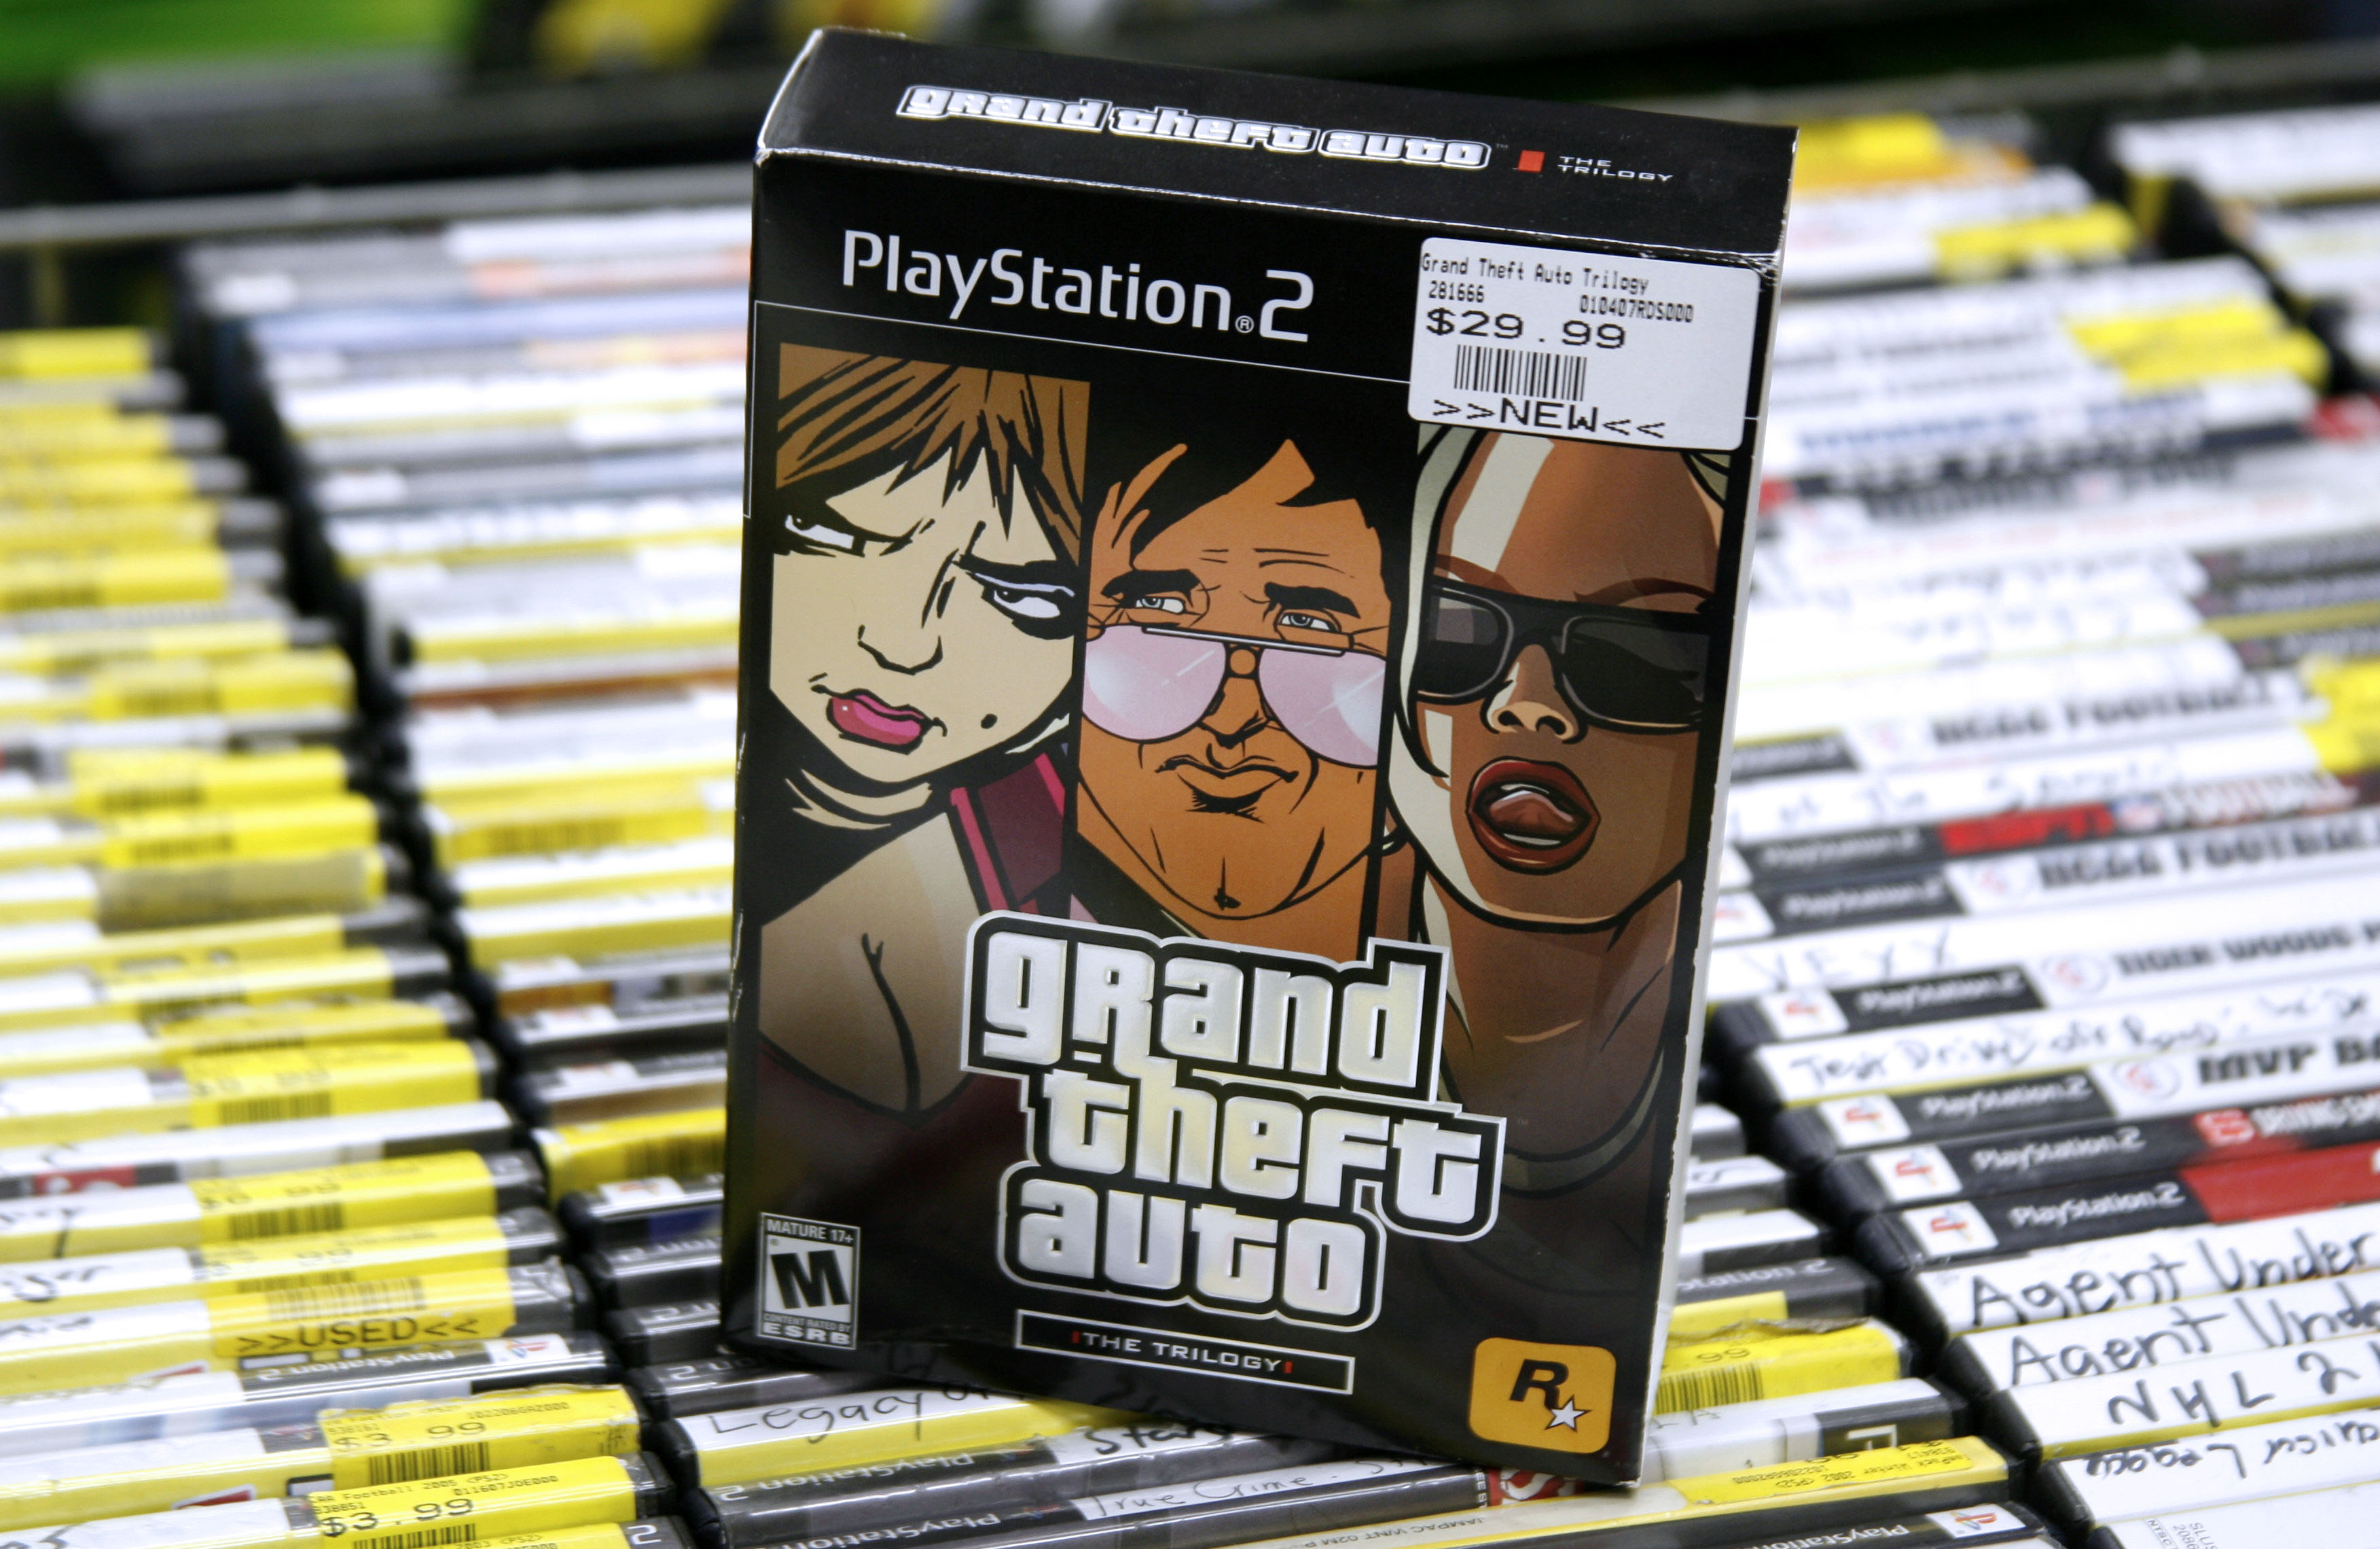 Grand Theft Auto Trilogy - Playstation 2